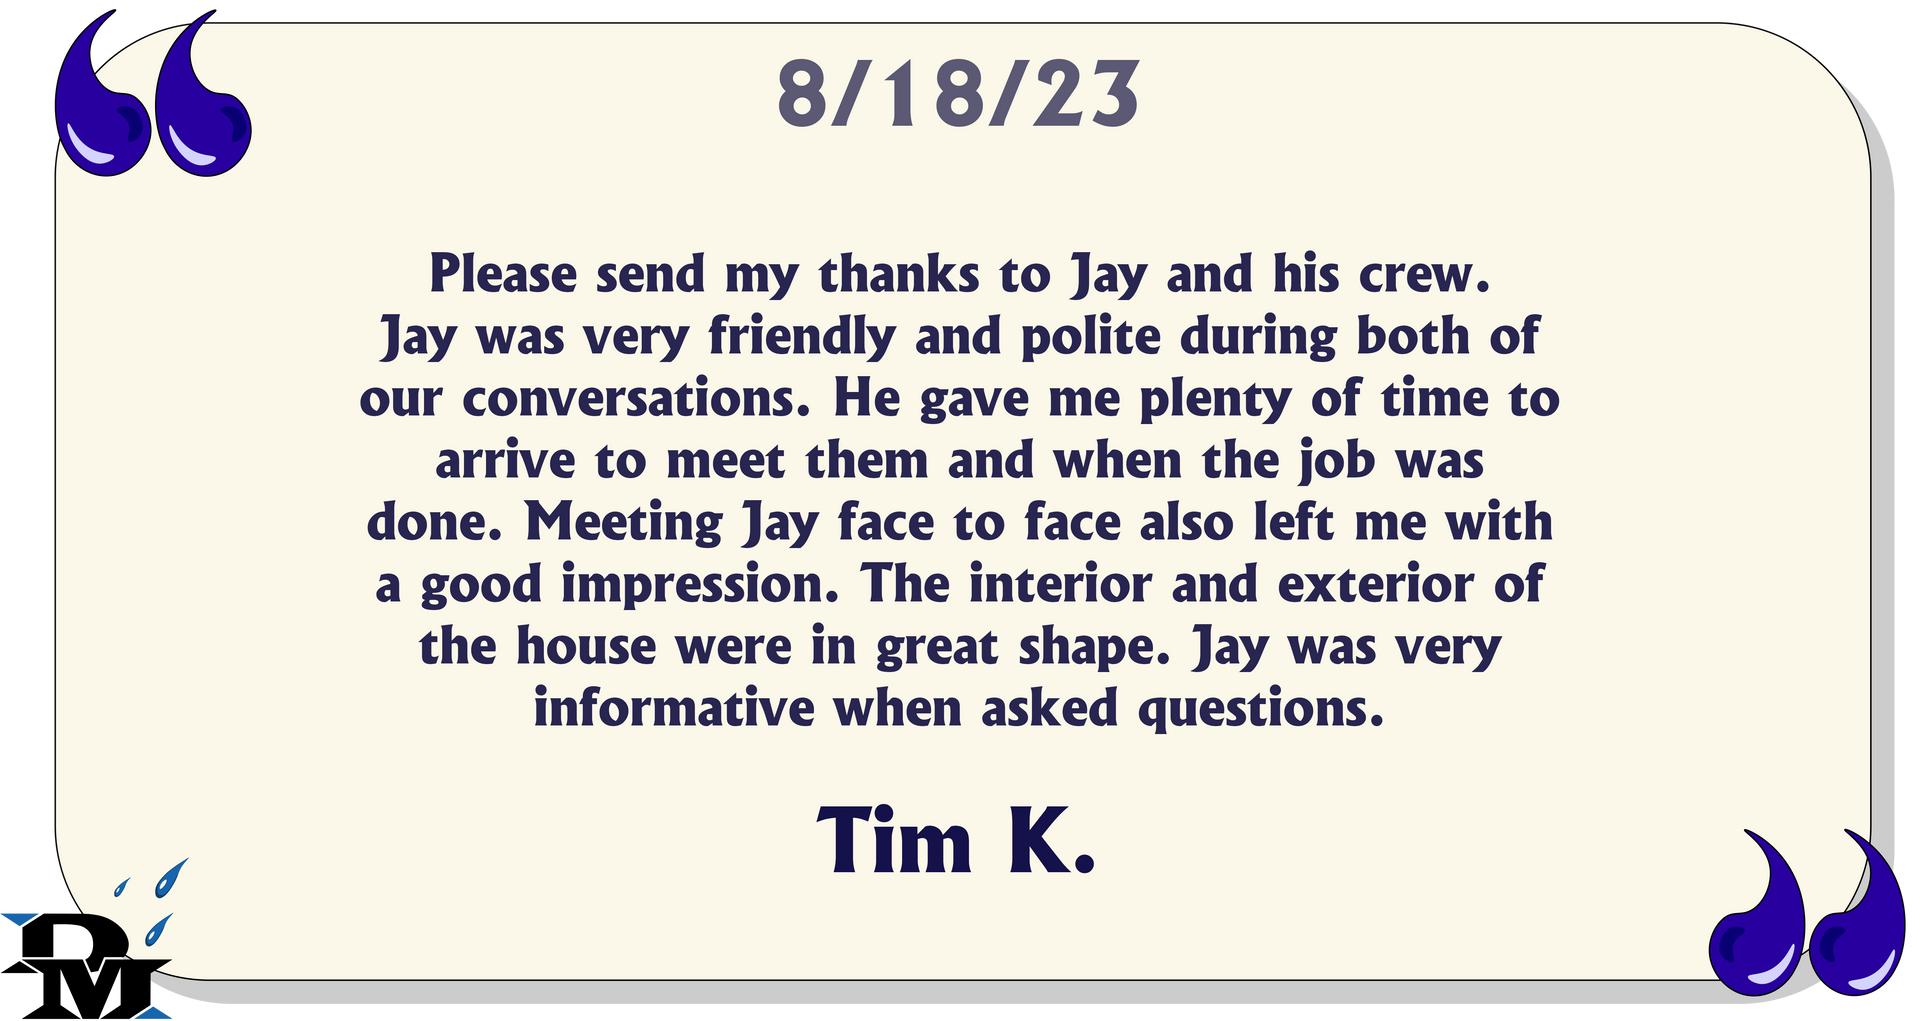 Please send my thanks to Jay and his crew. Jay was very friendly and polite during both of our conversations. He gave me plenty of time to arrive to meet them and when the job was done...